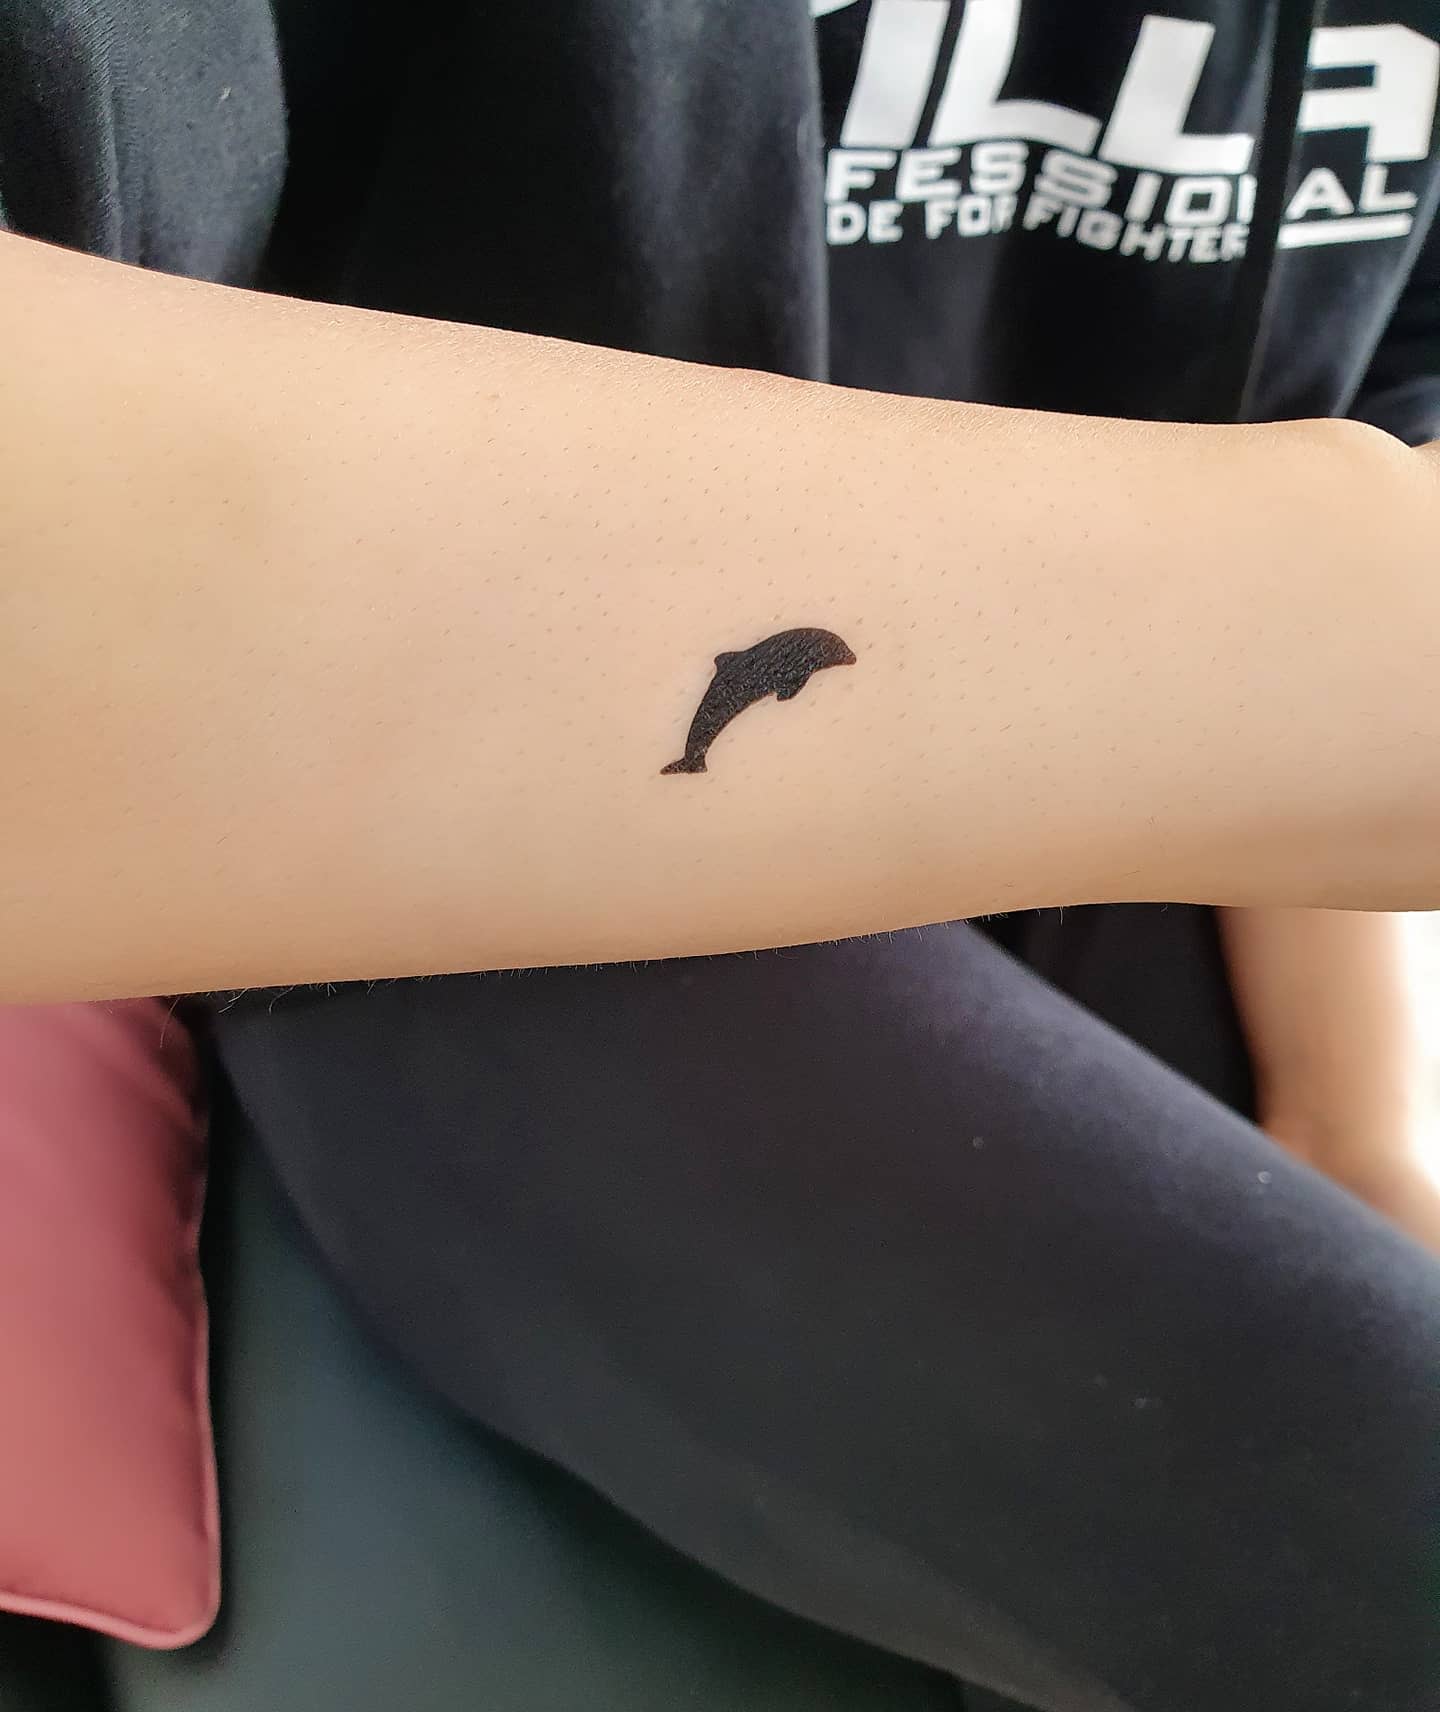 Dolphin Tattoo Meaning - What do Dolphin Tattoos Symbolize?